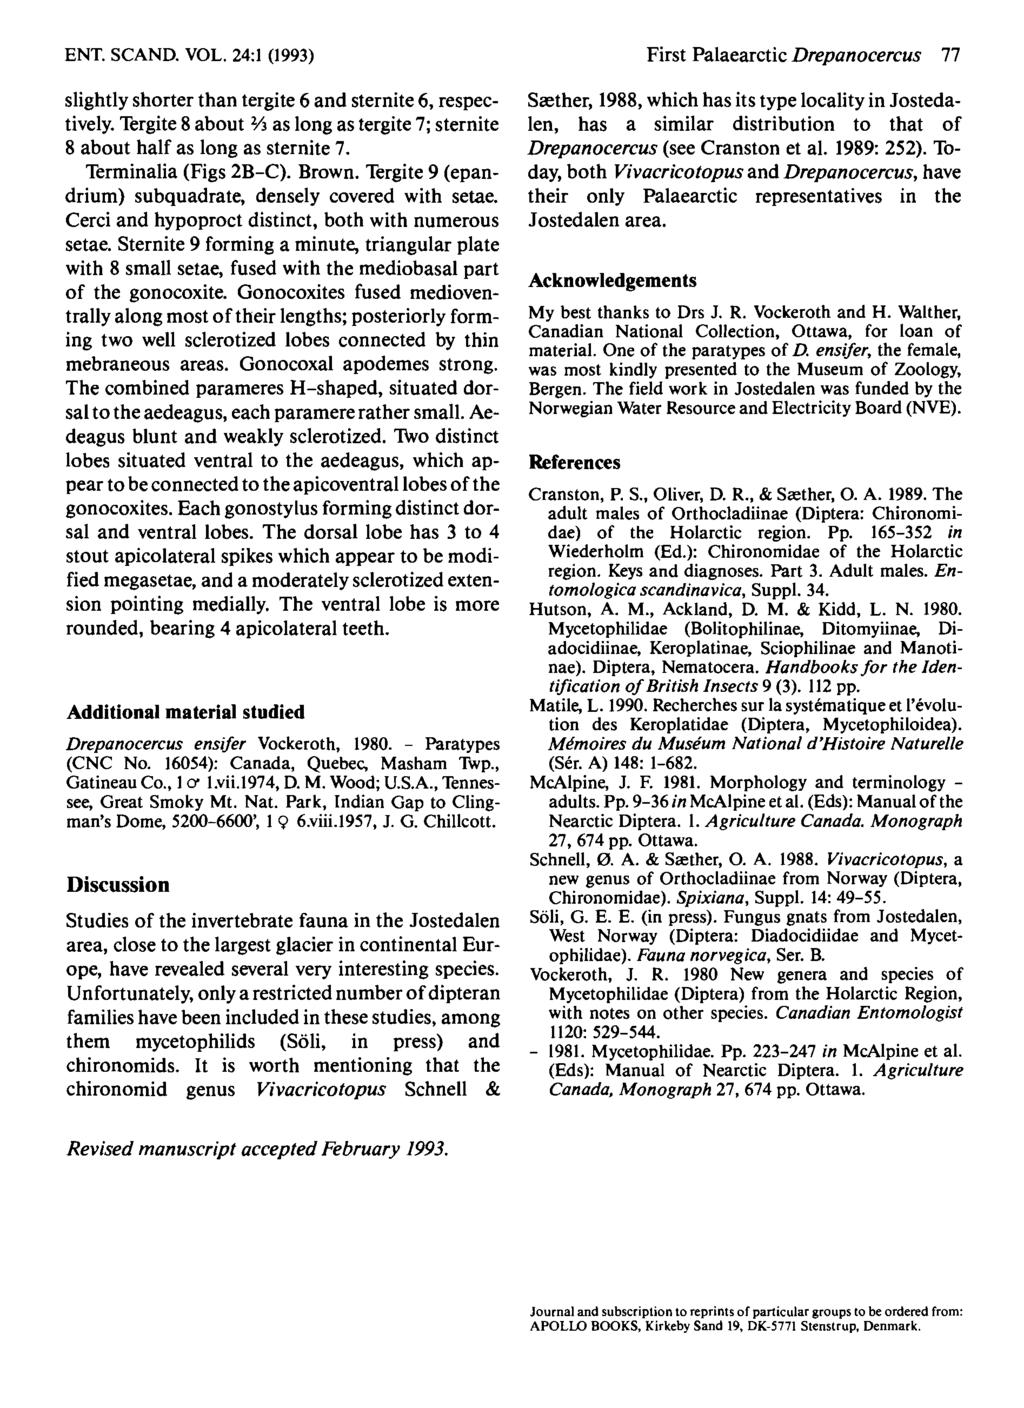 ENT. SCAND. VOL. 241 (1993) First Palaearctic Drepanocercus 77 slightly shorter than tergite 6 and sternite 6, respec- Szther, 1988, which has its type locality in Jostedatively.